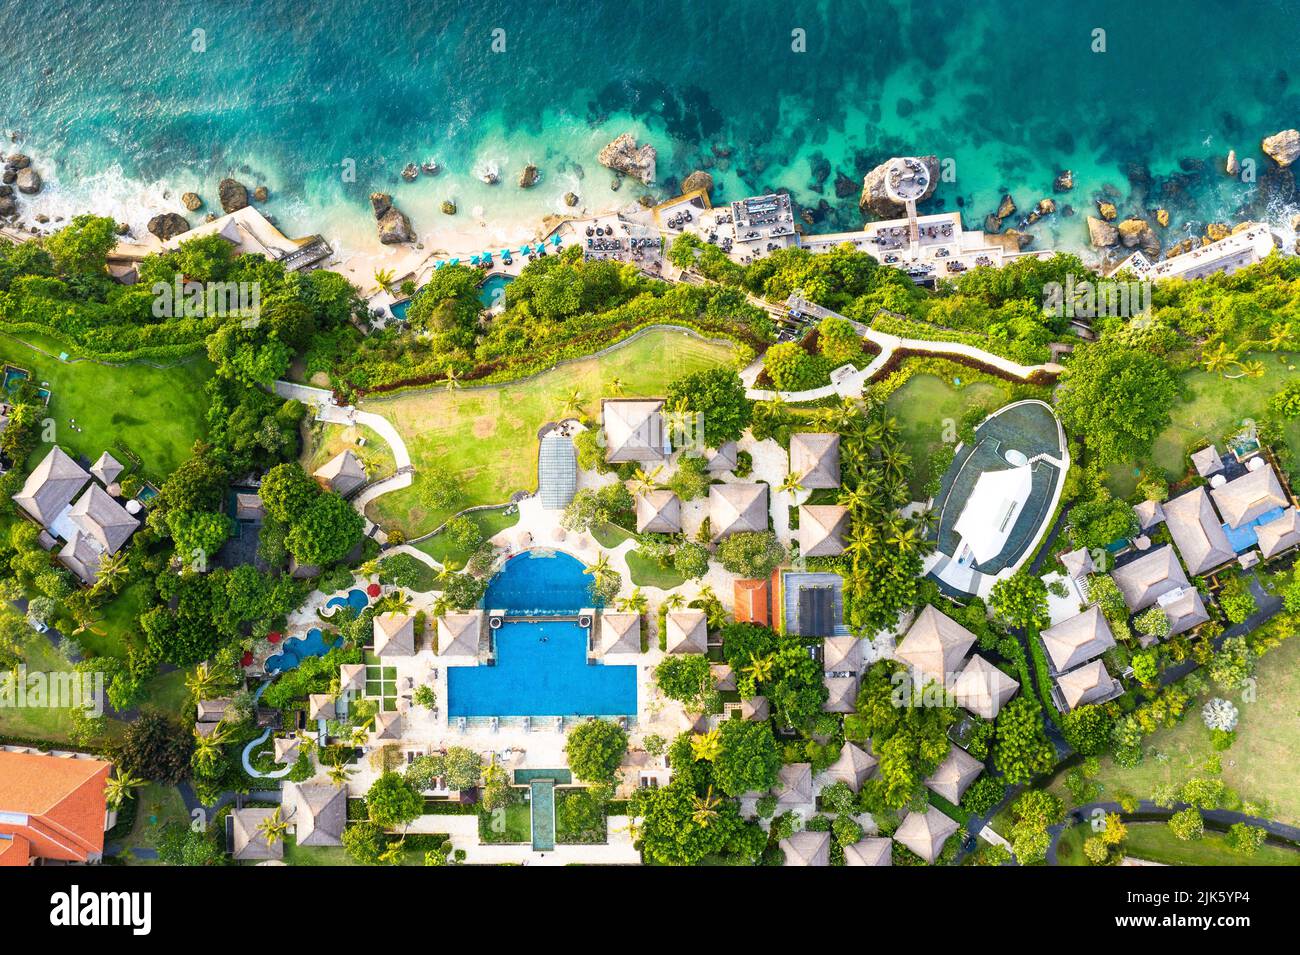 Bali, Indonesia - July 4 2022: Aerial view of the famous Ayana luxury resort and the Rock bar that lies directly on the cliff of the Bukit Peninsula i Stock Photo